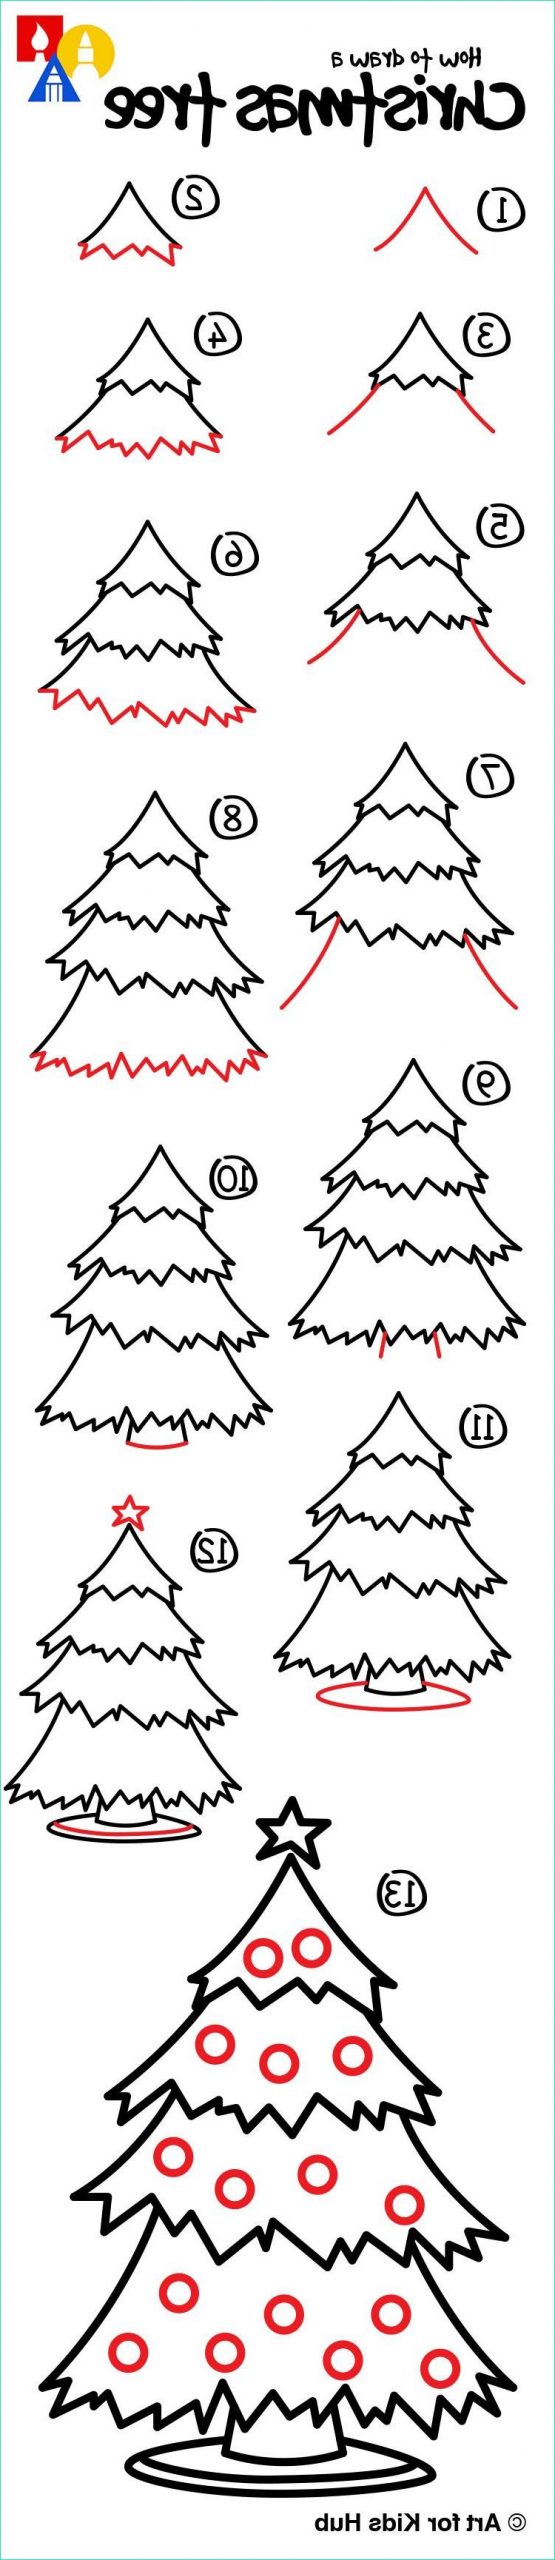 Sapin De Noel Dessin Facile Bestof Images How to Draw A Christmas Tree Art for Kids Hub